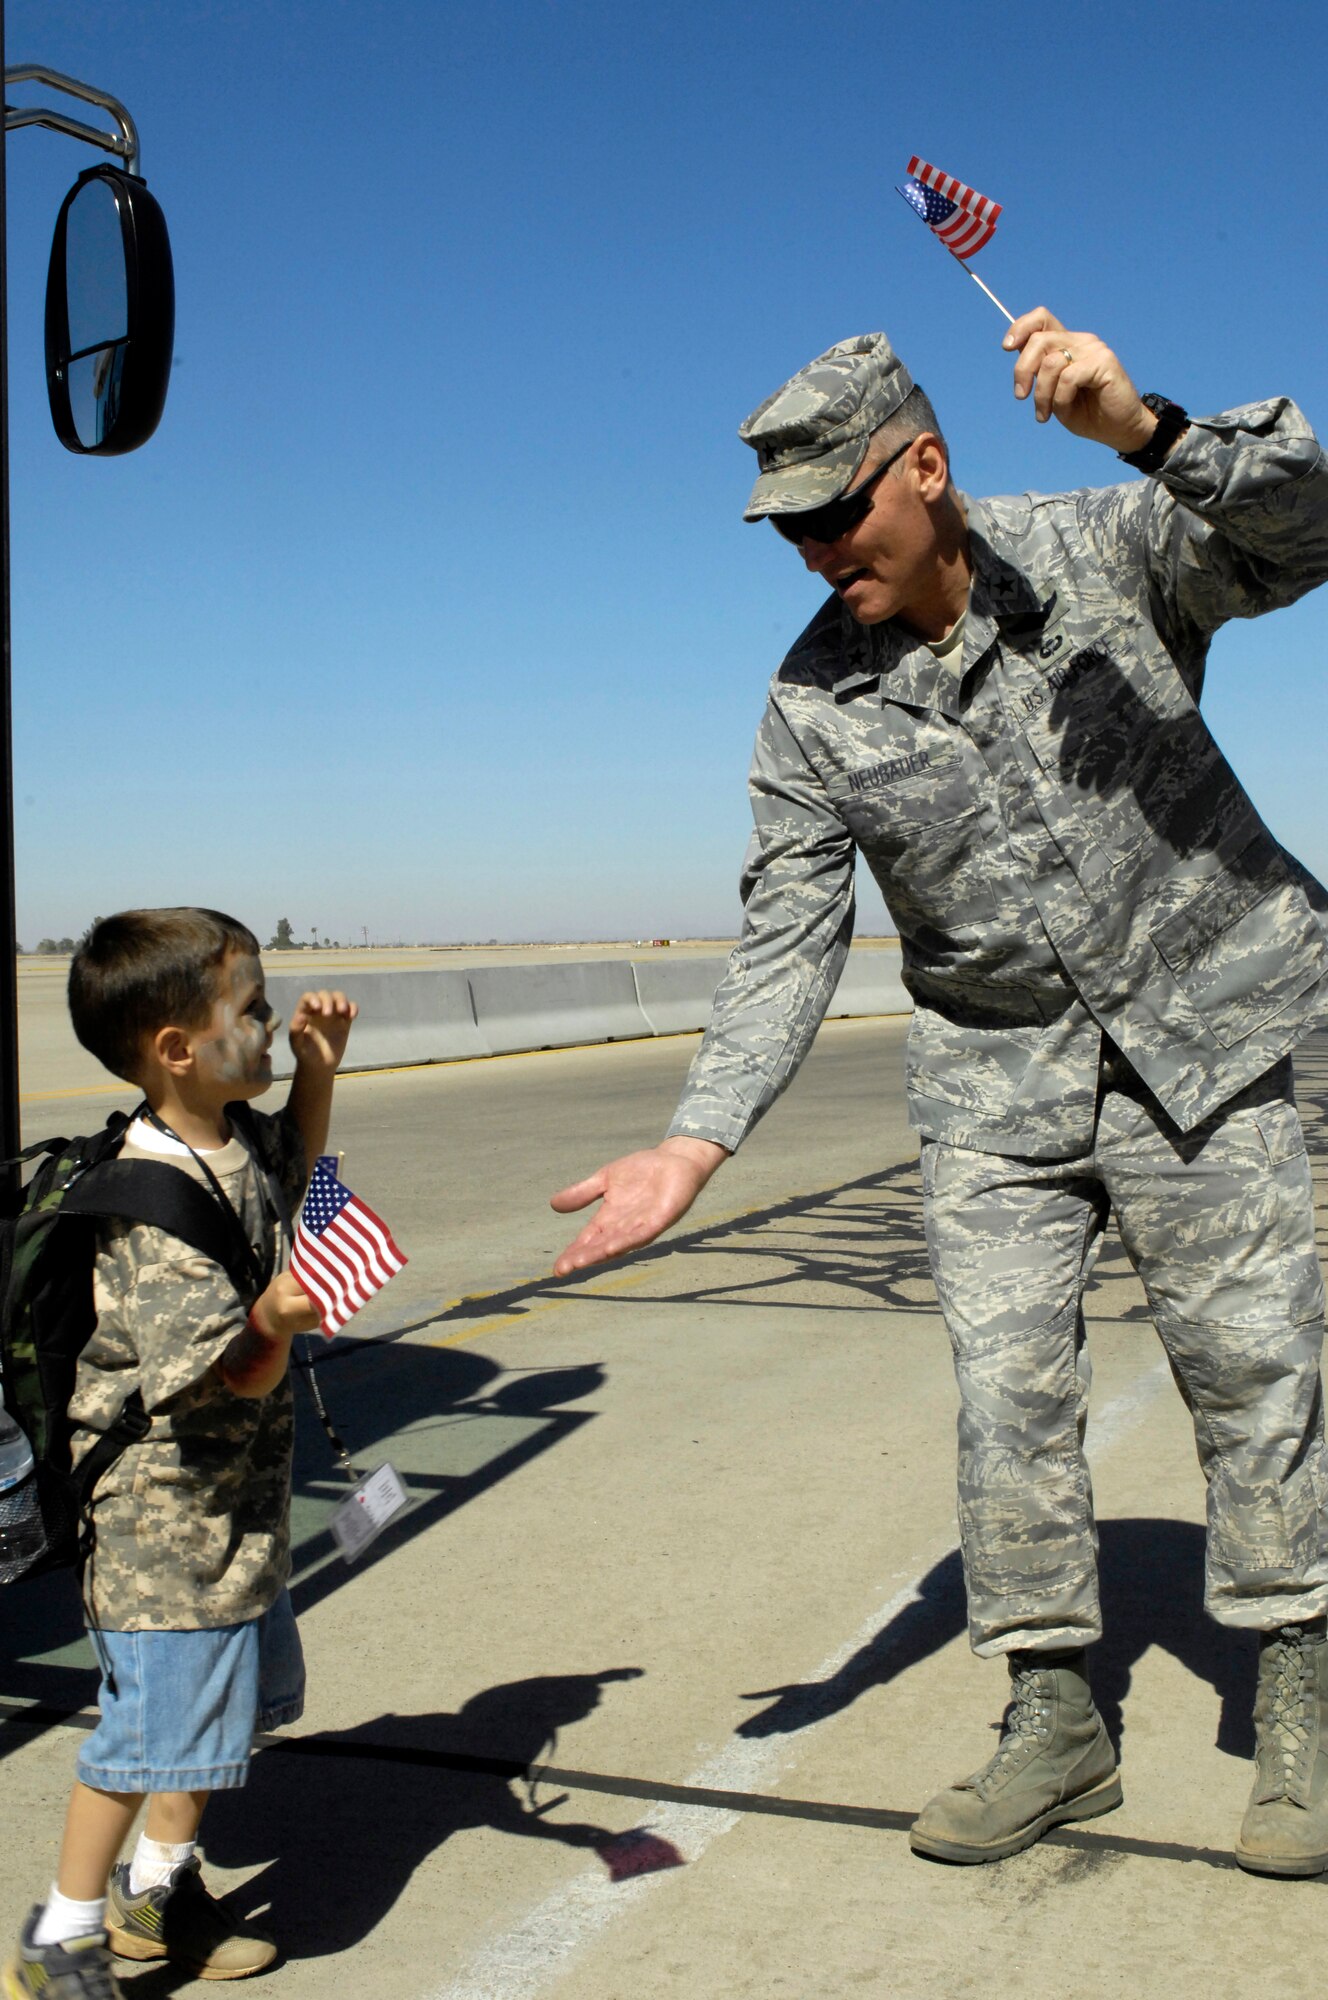 Brig. Gen. Kurt Neubauer, 56th Fighter Wing Commander,greets children that were "deploying" in support of the 2009 Operation Kids event, Oct. 24, 2009, Luke Air Force Base, Arizona. (U.S. Air Force Photo by Staff Sgt. Jason Colbert)